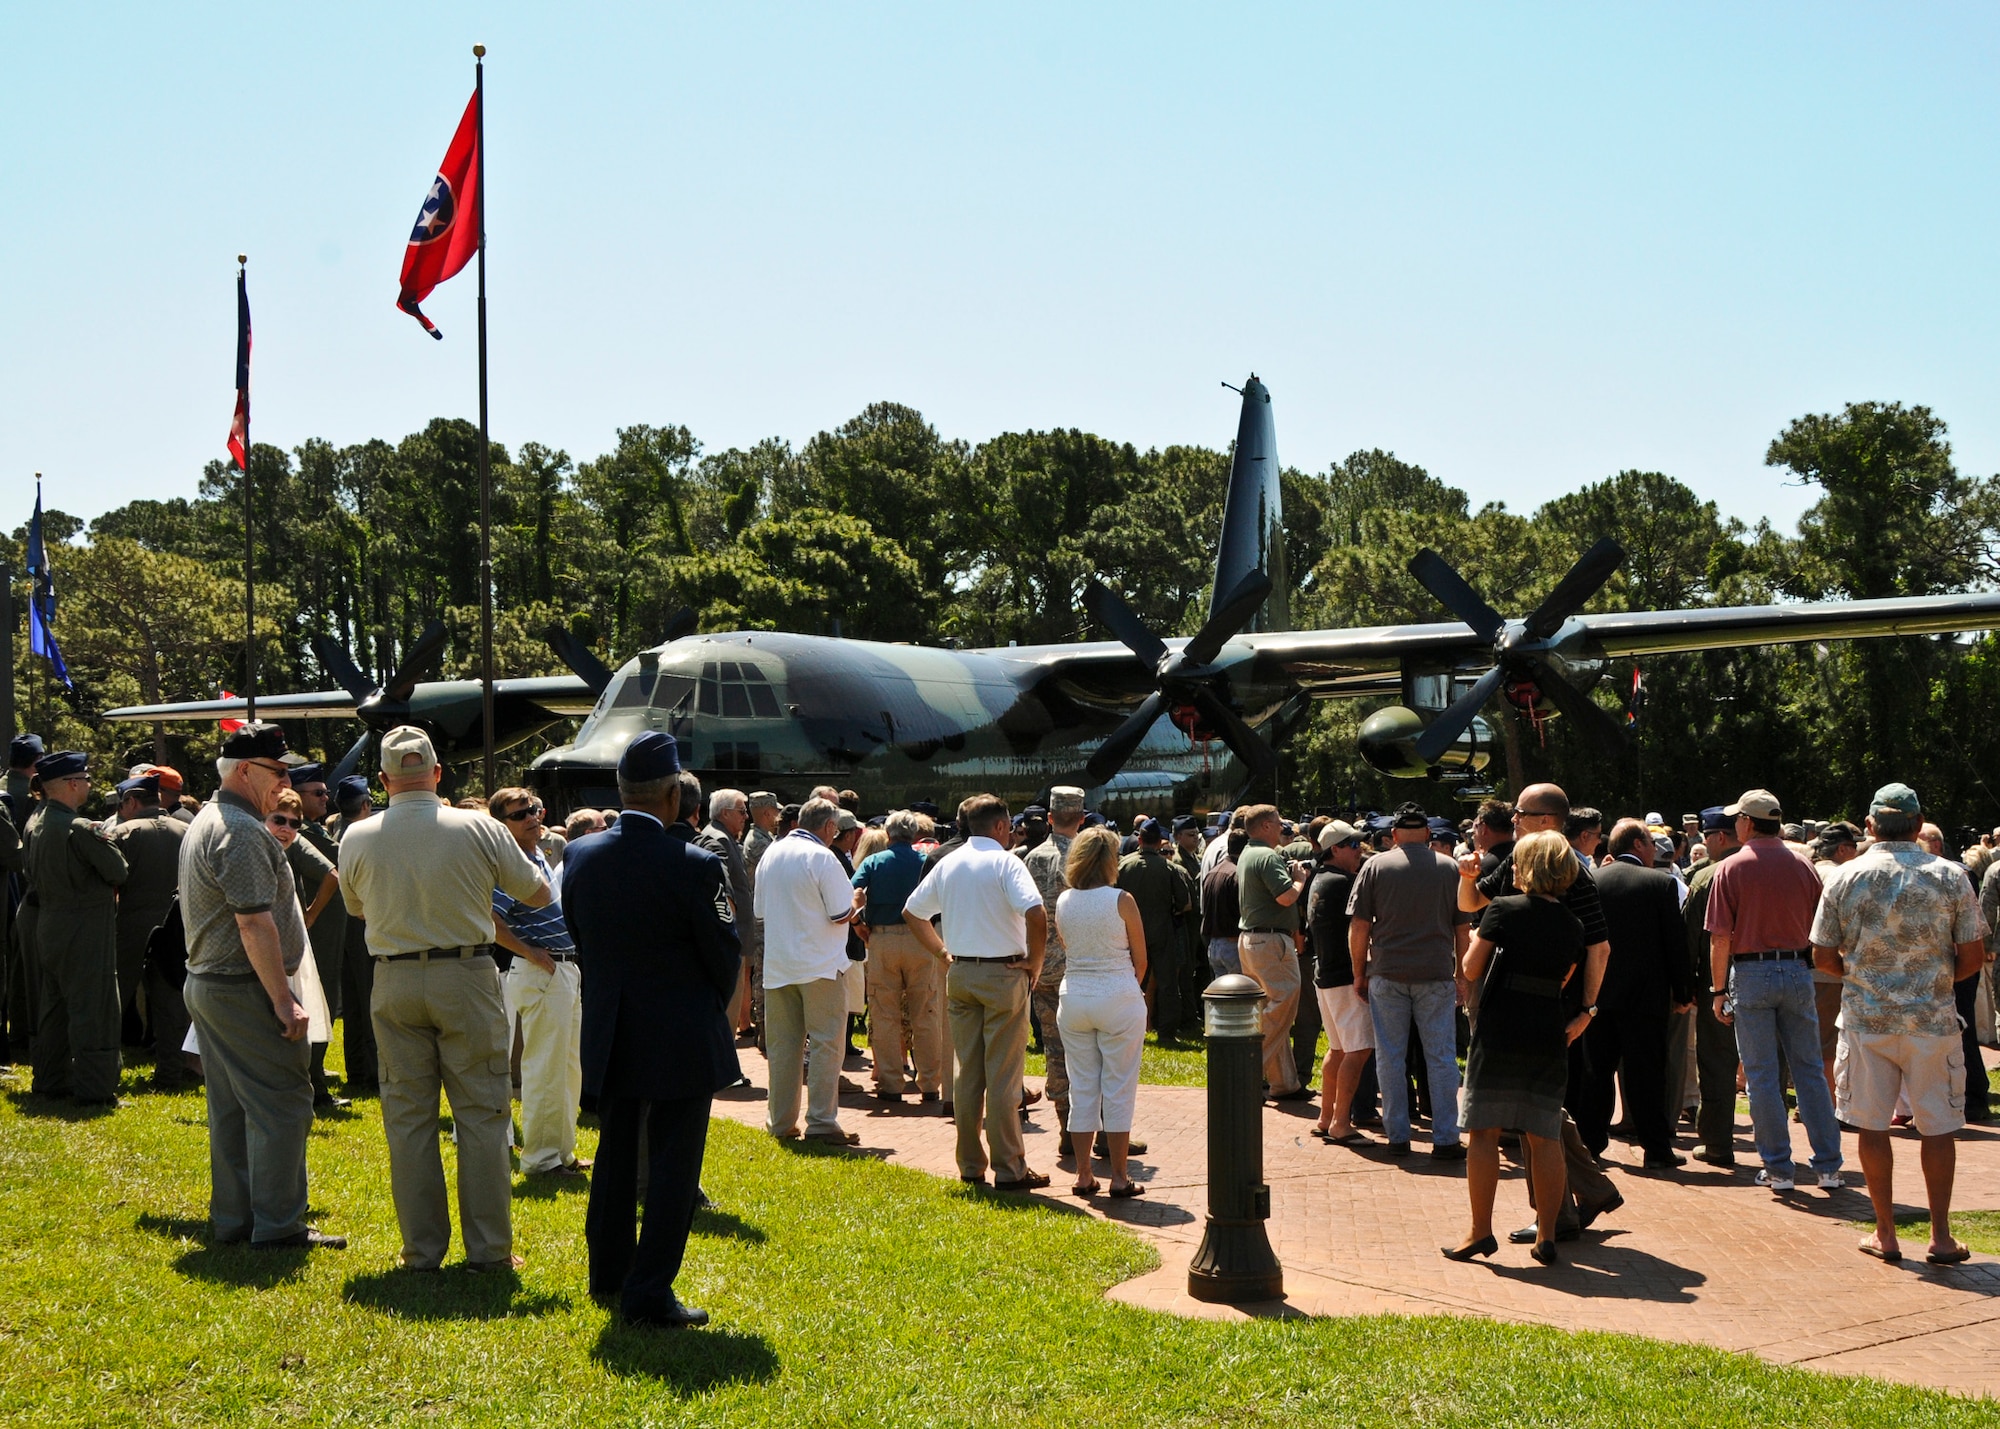 A large crowd gathers around the MC-130E Combat Talon I known as “Wild Thing” prior to its official dedication ceremony at the Hurlburt Field airpark May 6.  The Talon known as “Wild Thing” had a 46-year Air Force career and 22,336.5 flight hours.  (U.S. Air Force photo/Dan Neely)